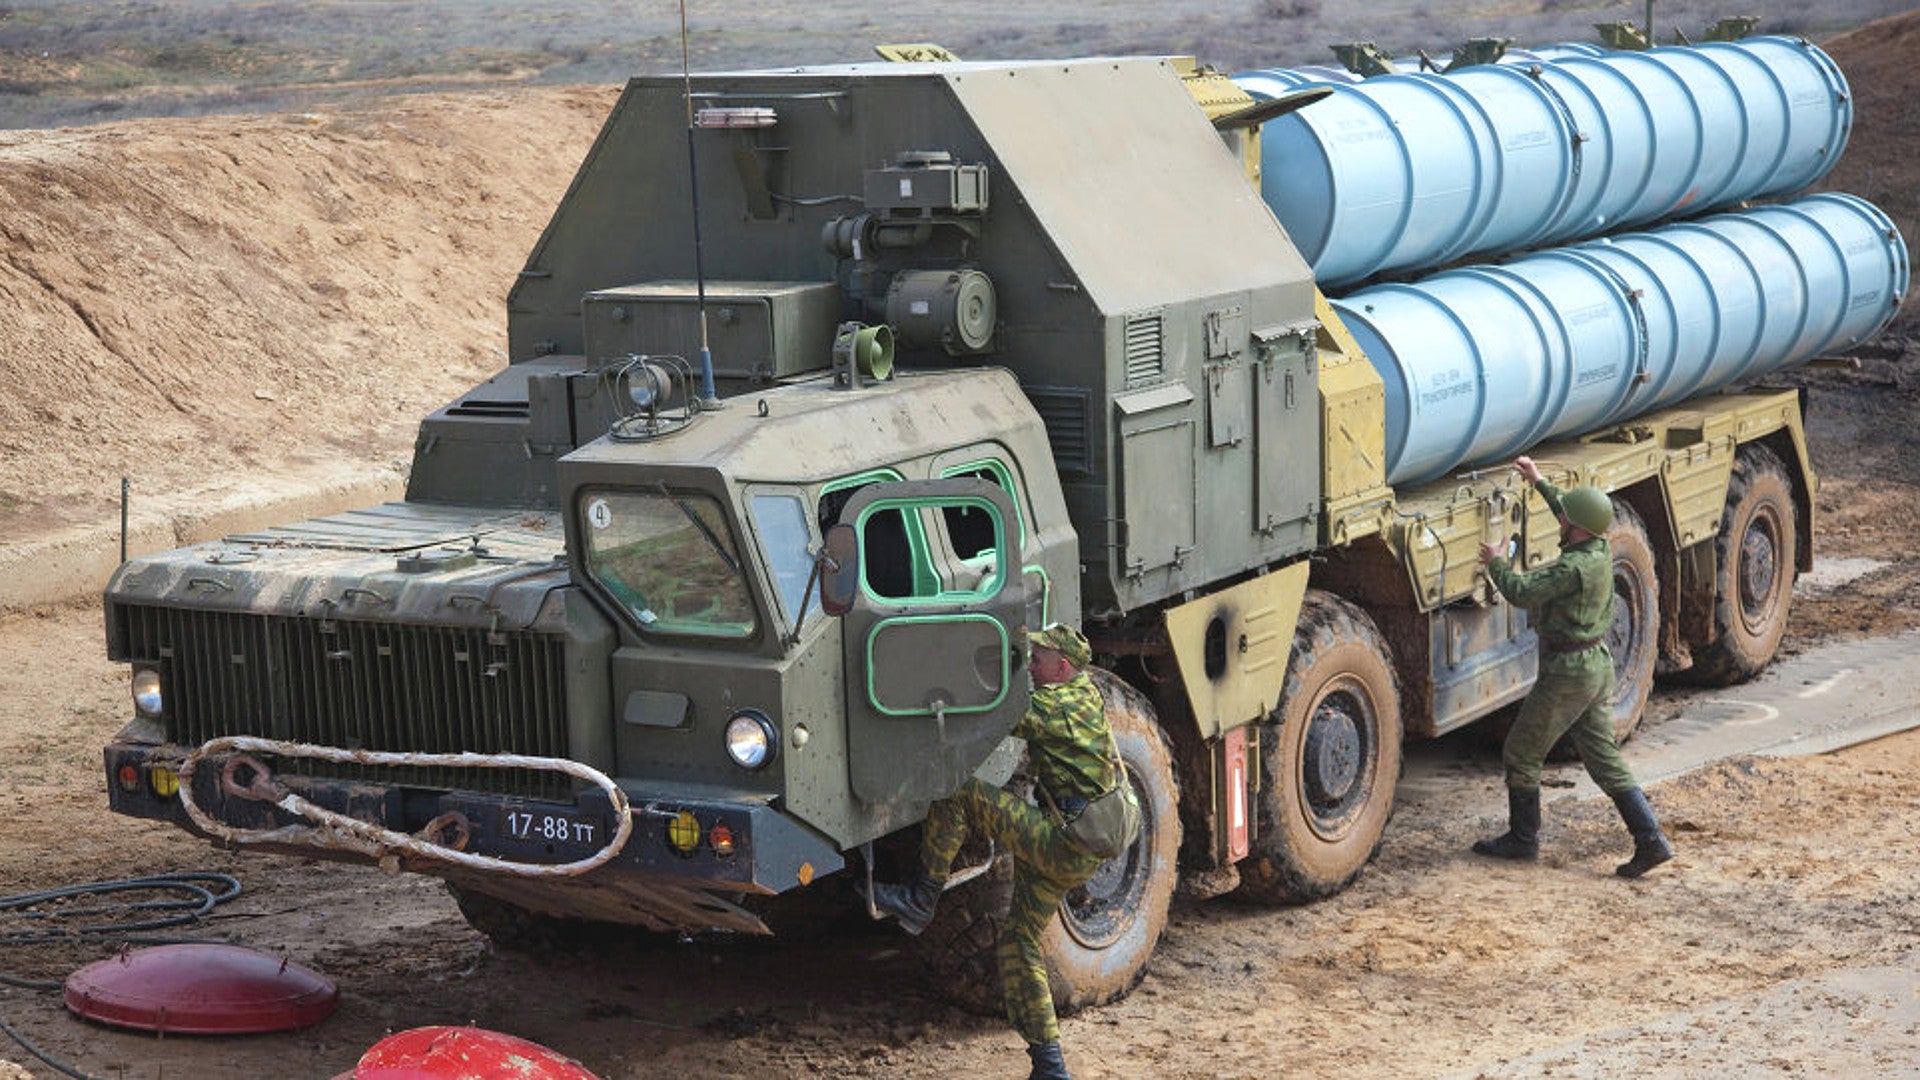 Giving Syria S-300 Surface To Air Missile Systems Won’t Halt Israeli Strikes